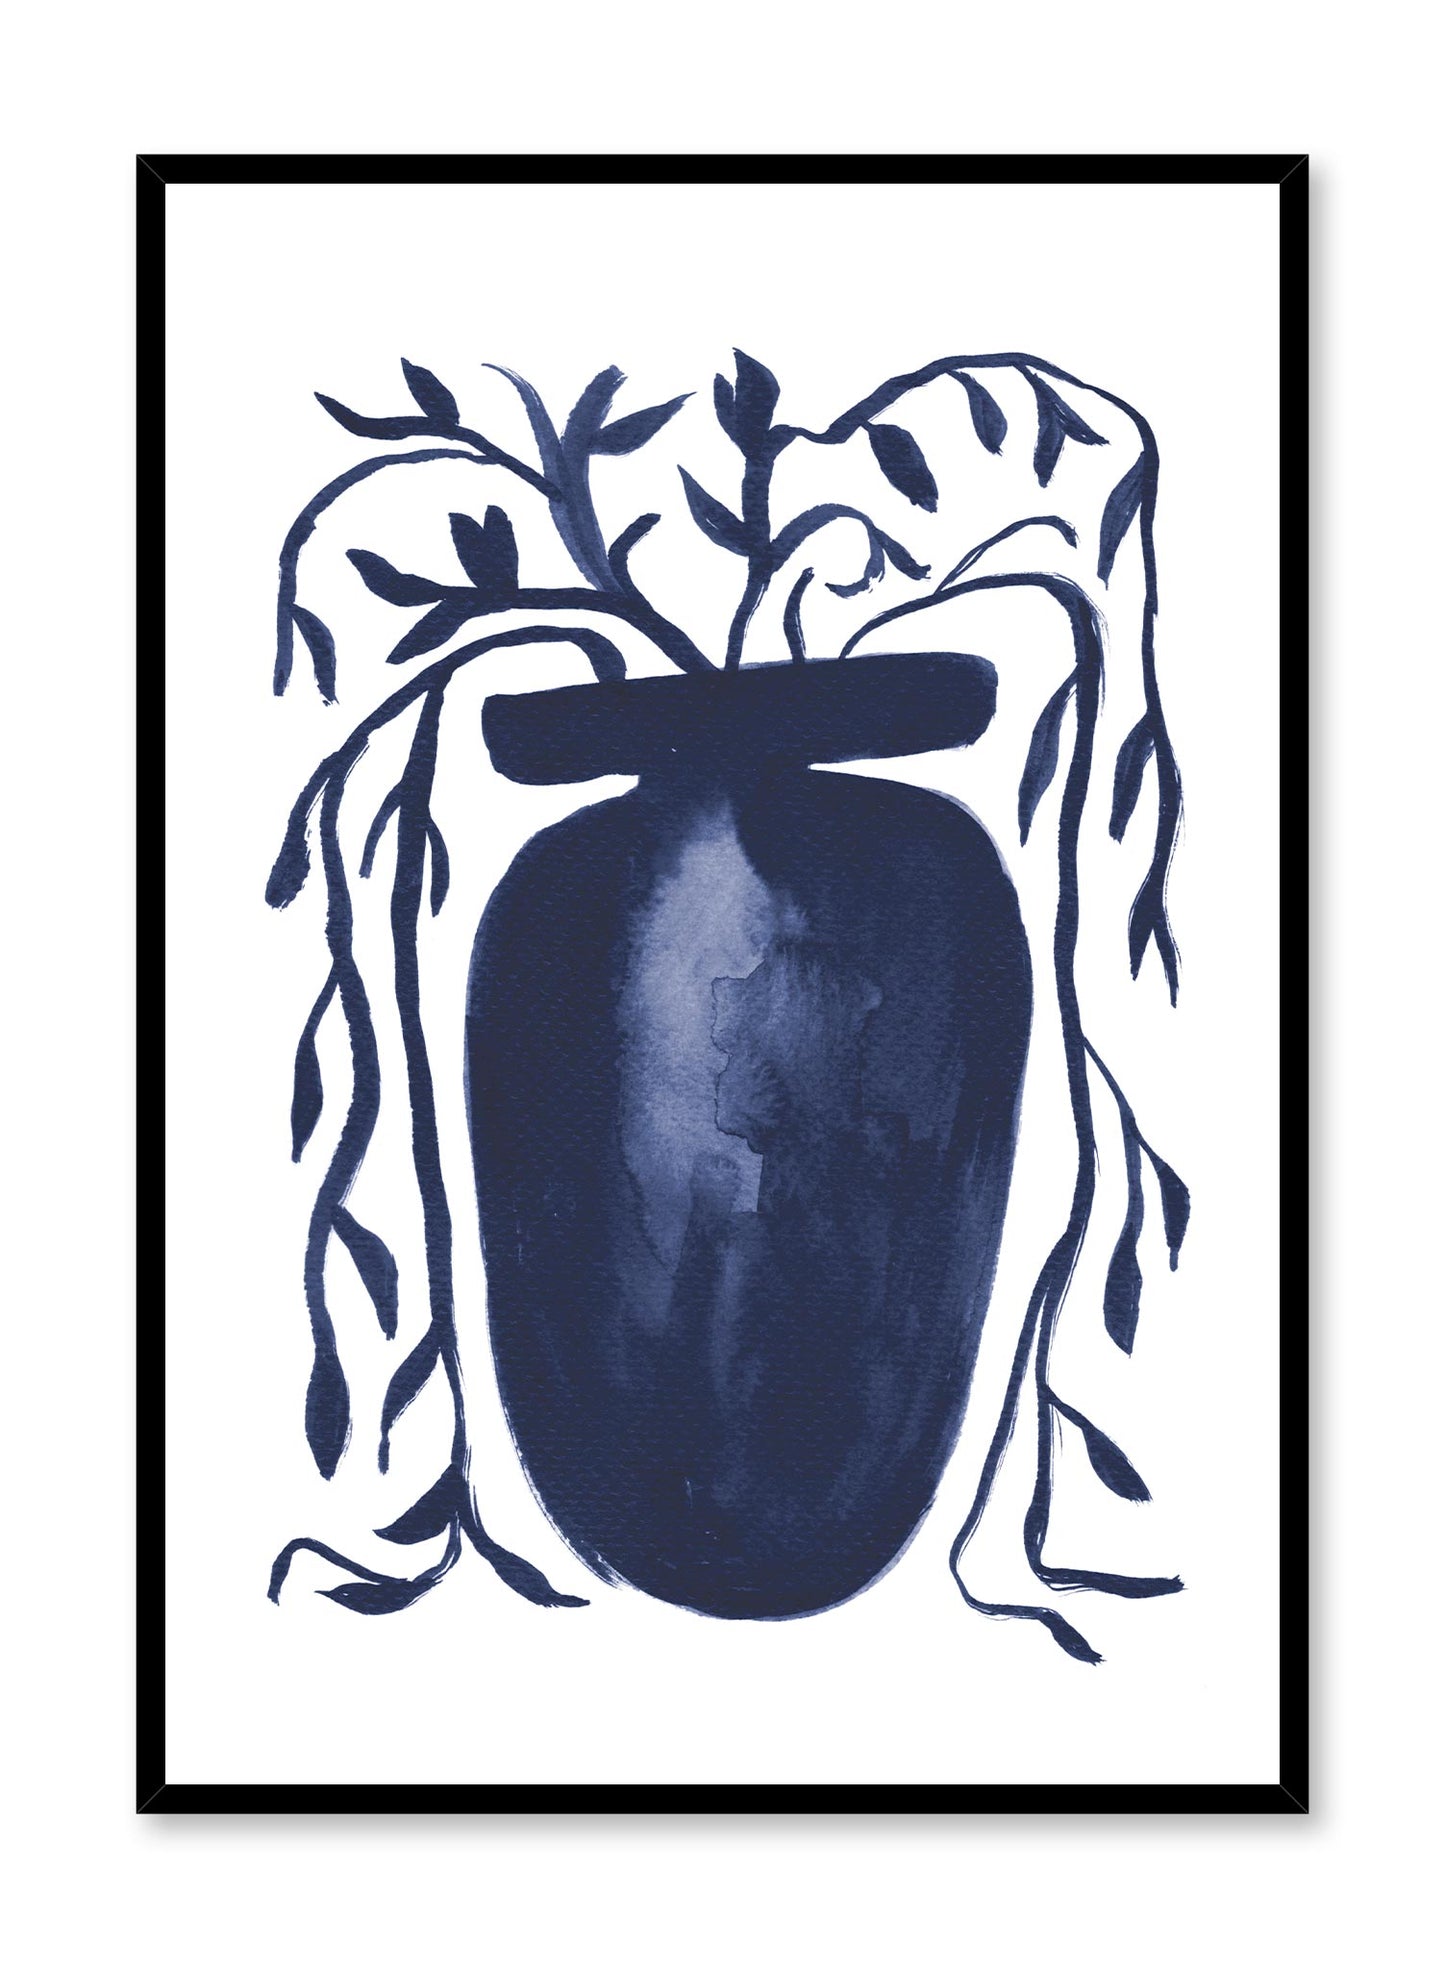 Ancestral Vase is a minimalist illustration by Opposite Wall of an enormous blue vase with a blue plant coming out of it.